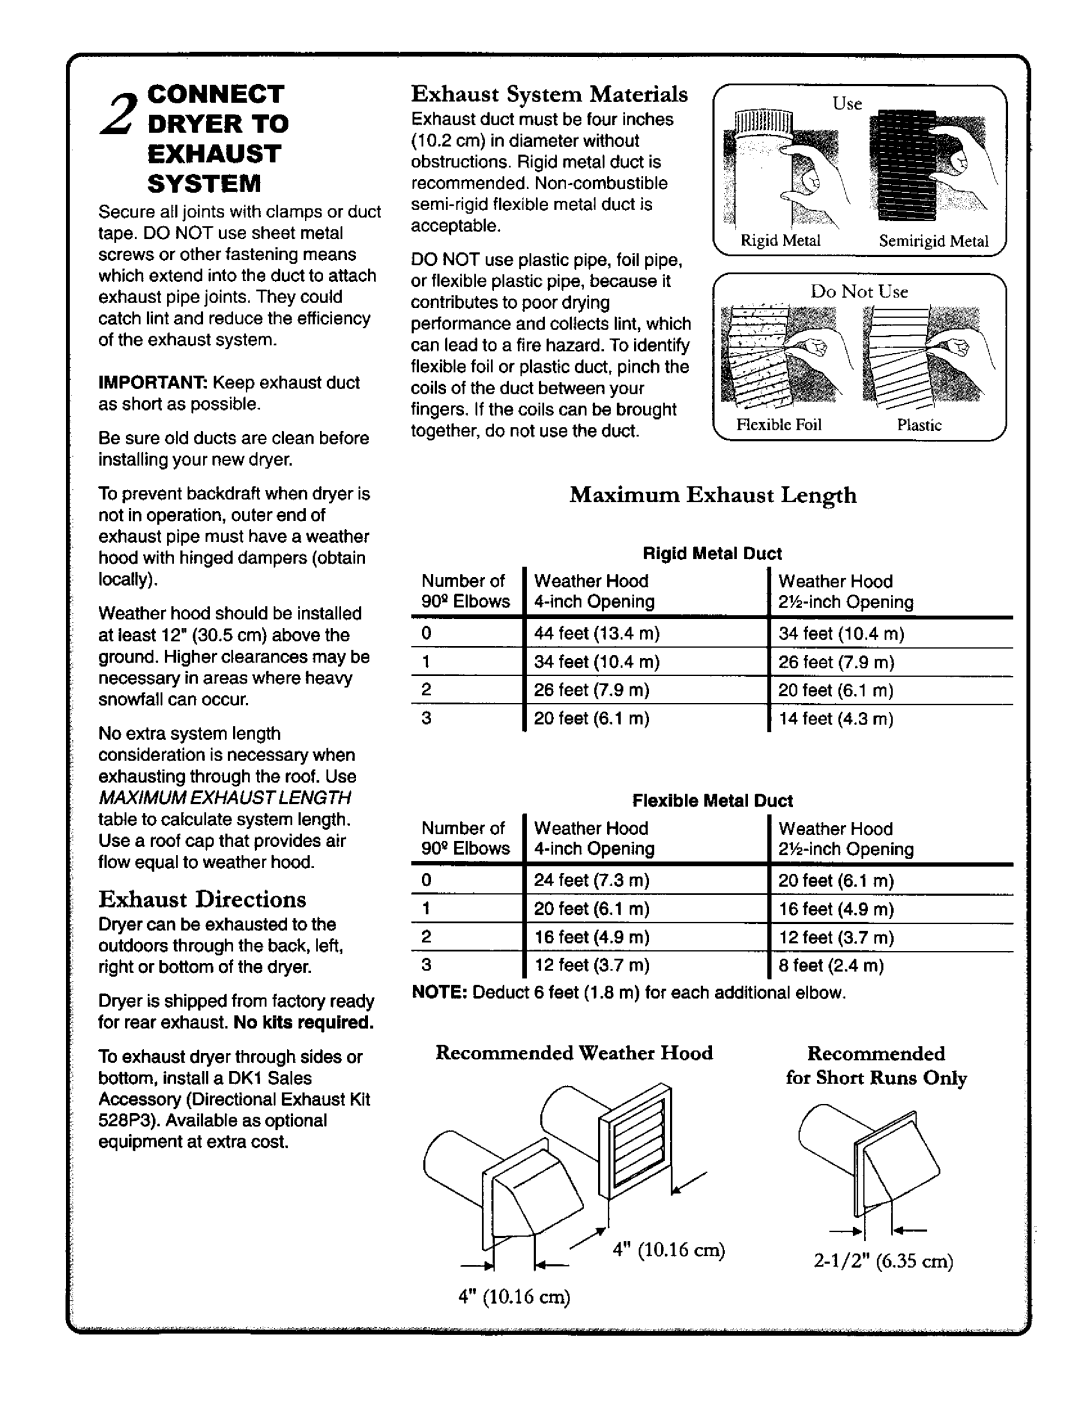 Amana 40086101 owner manual Connect Dryer To Exhaust System, Exhaust Directions 